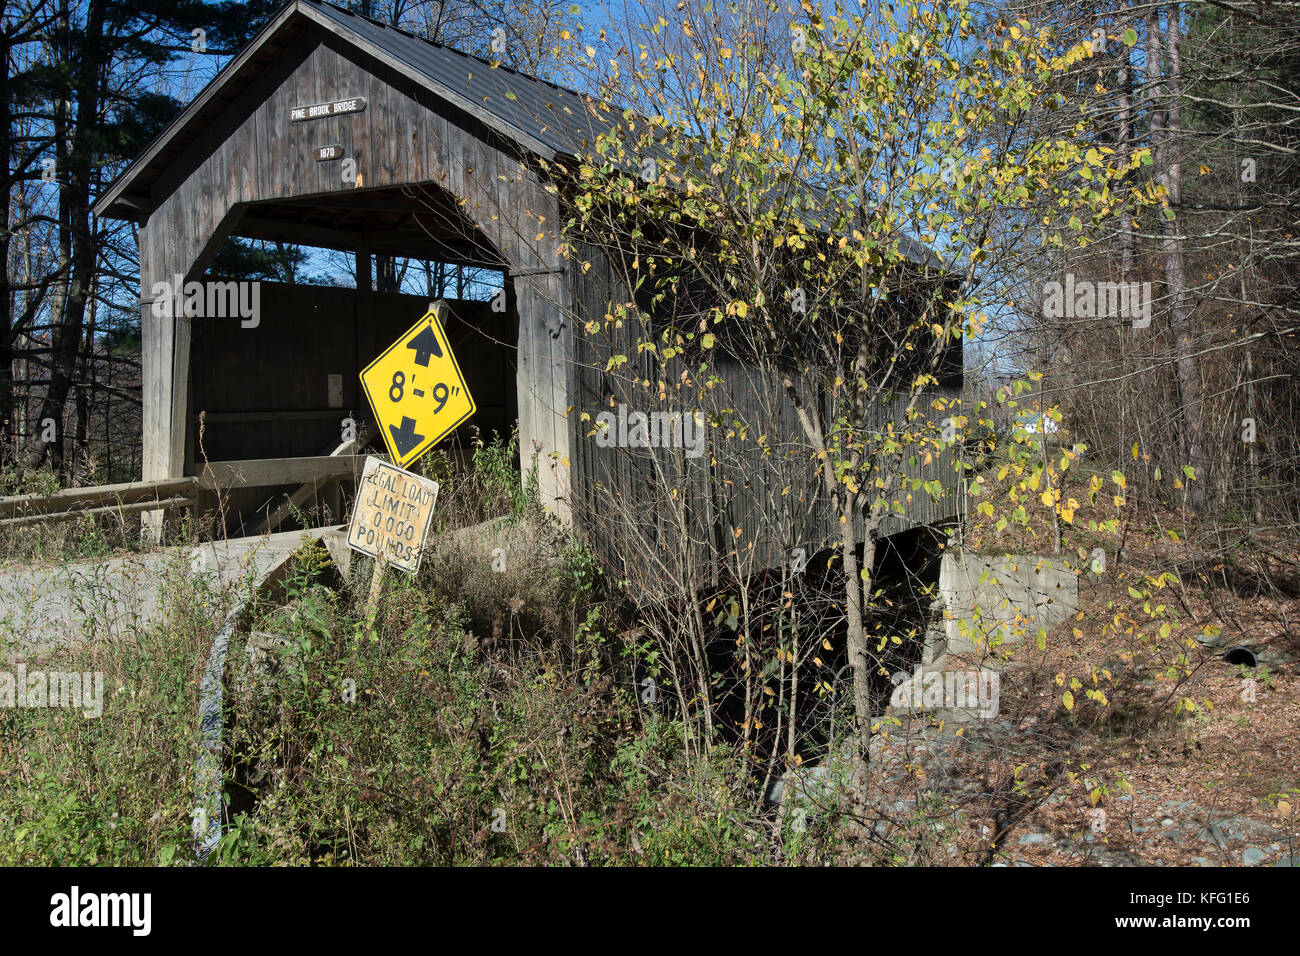 The Pine Brook Covered Bridge in Waitsfield, Vermont, USA Stock Photo